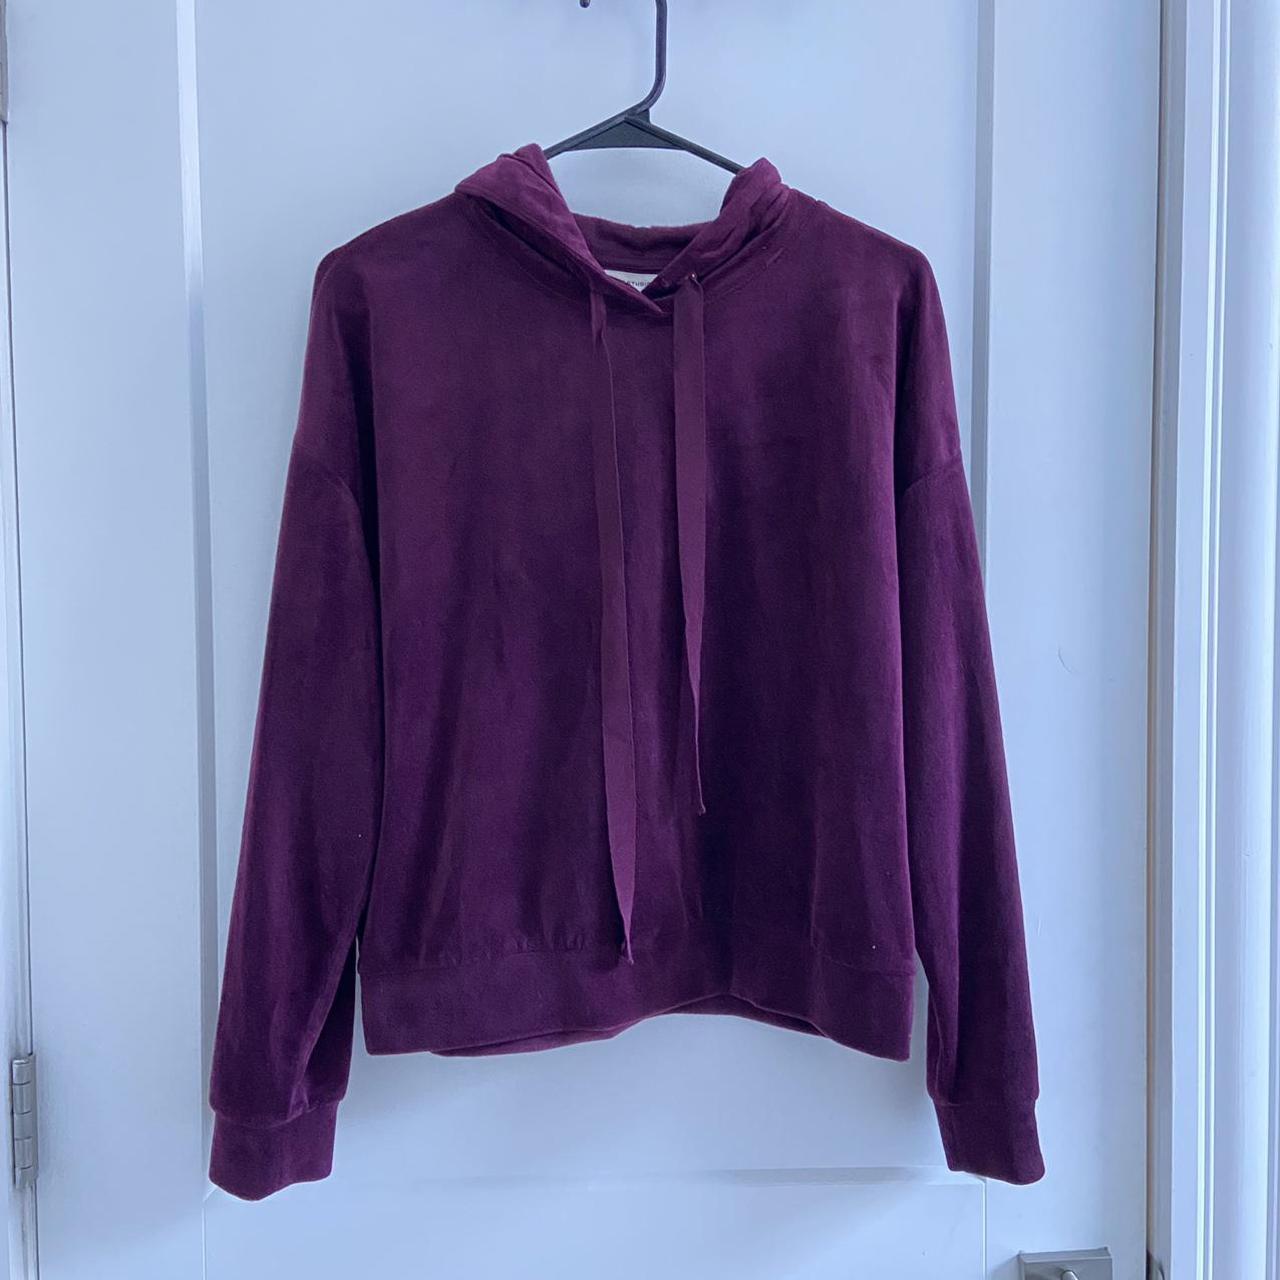 Product Image 4 - Cool mauve velvet hoodie from